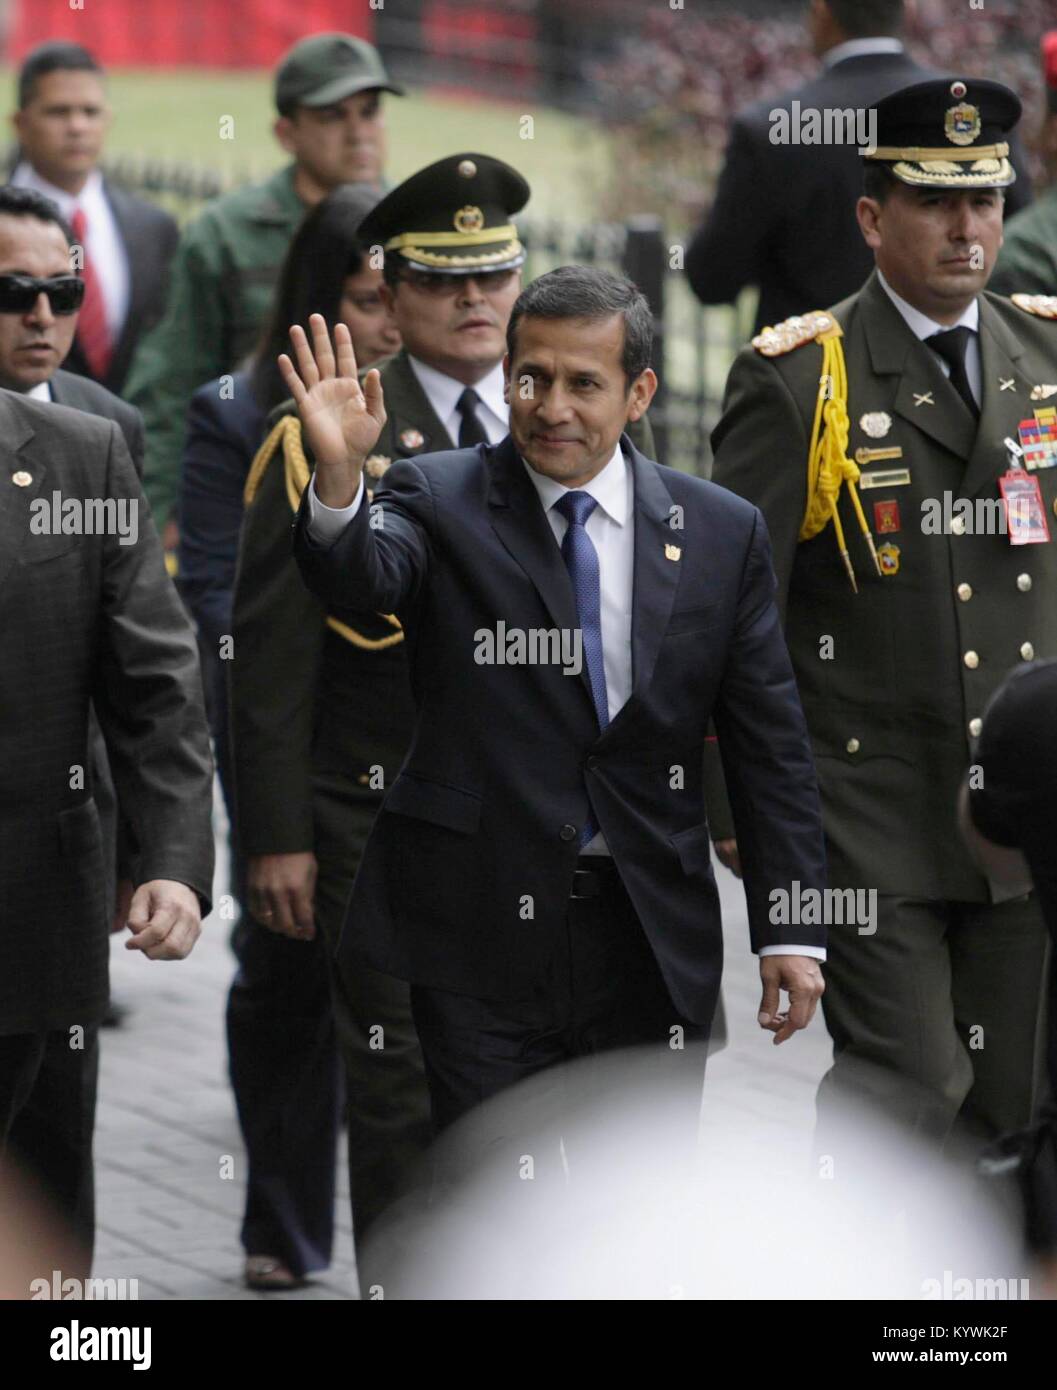 Caracas, Distrito Capital, Venezuela. 19th Apr, 2013. April 19, 2013. Ollanta Humala (c) president of Peru, arrives at the national assembly for the swearing-in of Nicolas Maduro, as president of Venezuela. Photo: Juan Carlos Hernandez Credit: Juan Carlos Hernandez/ZUMA Wire/Alamy Live News Stock Photo